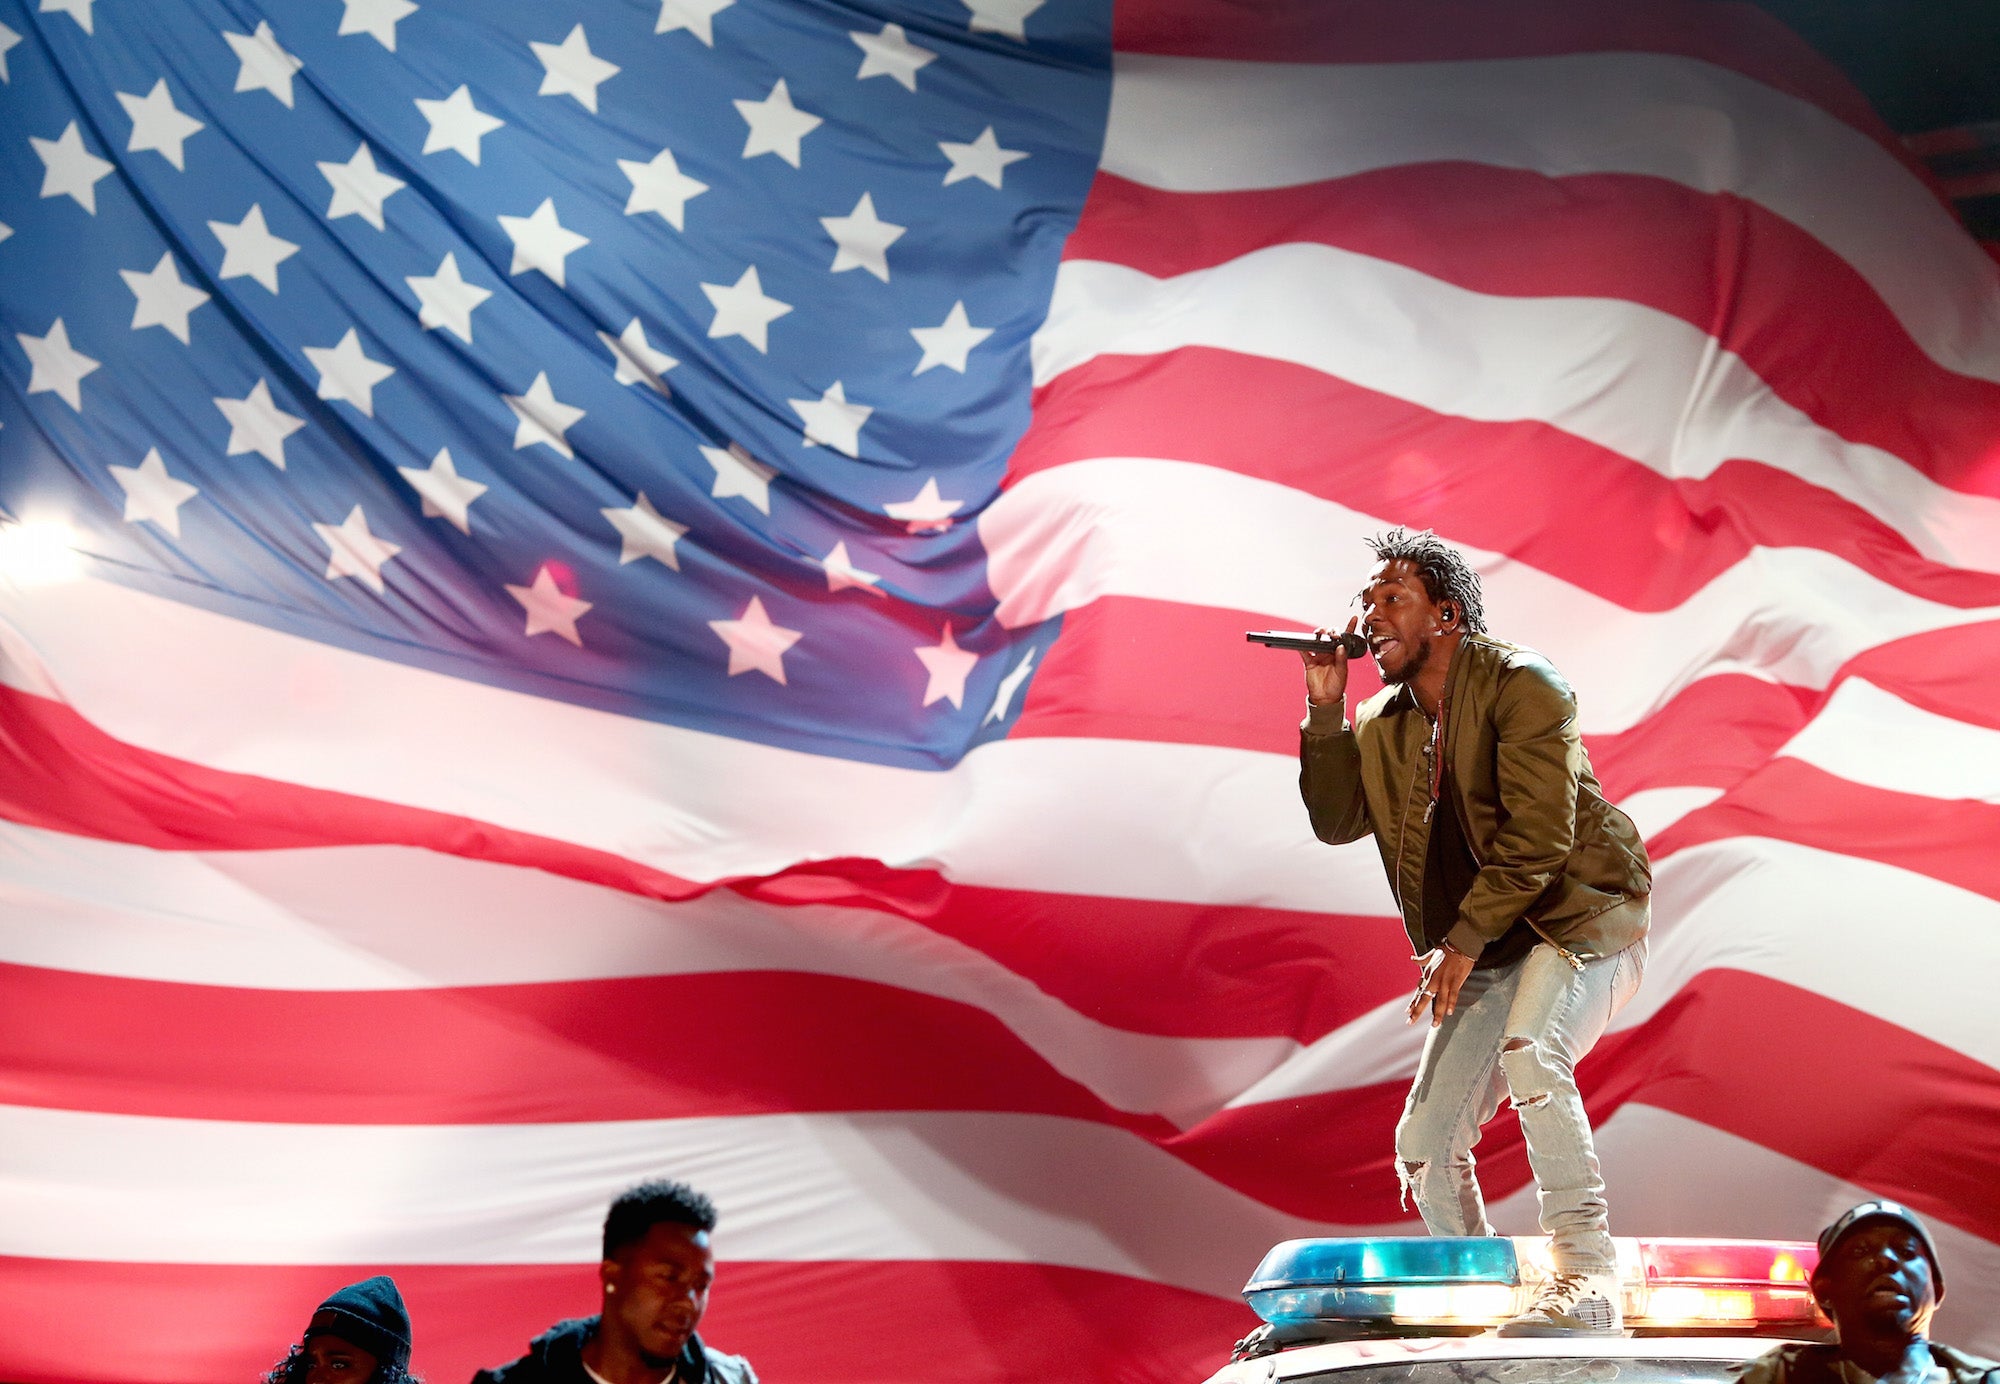 Recording artist Kendrick Lamar performs onstage during the 2015 BET Awards at the Microsoft Theater on 20 June 28 2015 in Los Angeles, California.